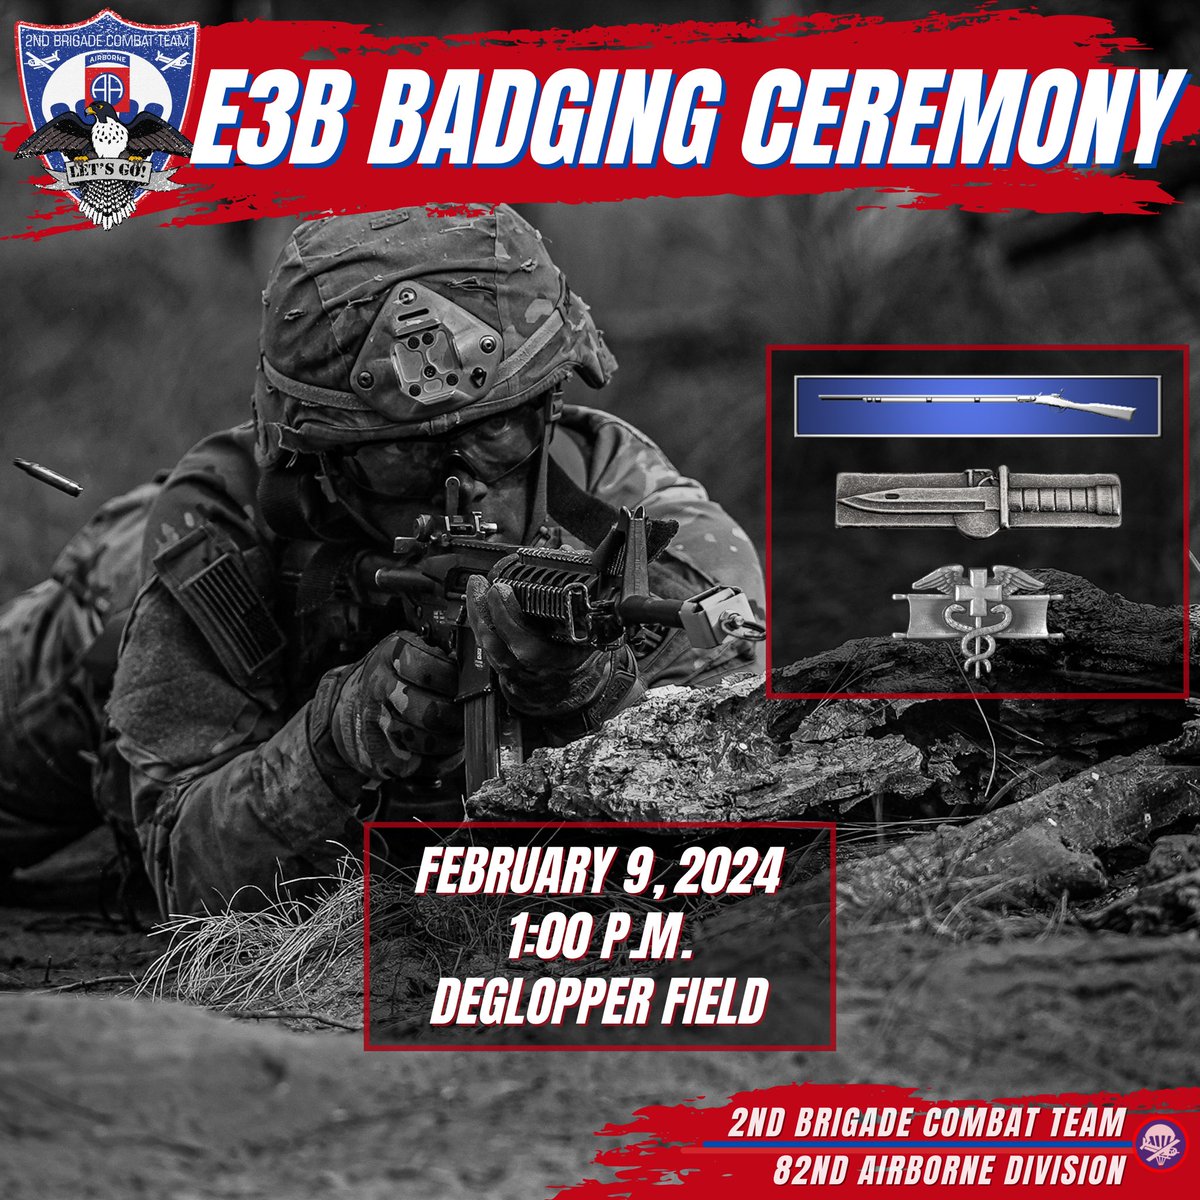 In less than 24 hours, our remaining #E3B candidates will #EarntheBadge! Come join us as they earn the right and privilege to wear it proudly! LET’S GO! #Warfighting #ThisWellDefend #FalconBrigade #FalconFundamentals #BeReady #FalconFit #BeAllYouCanBe #AATW